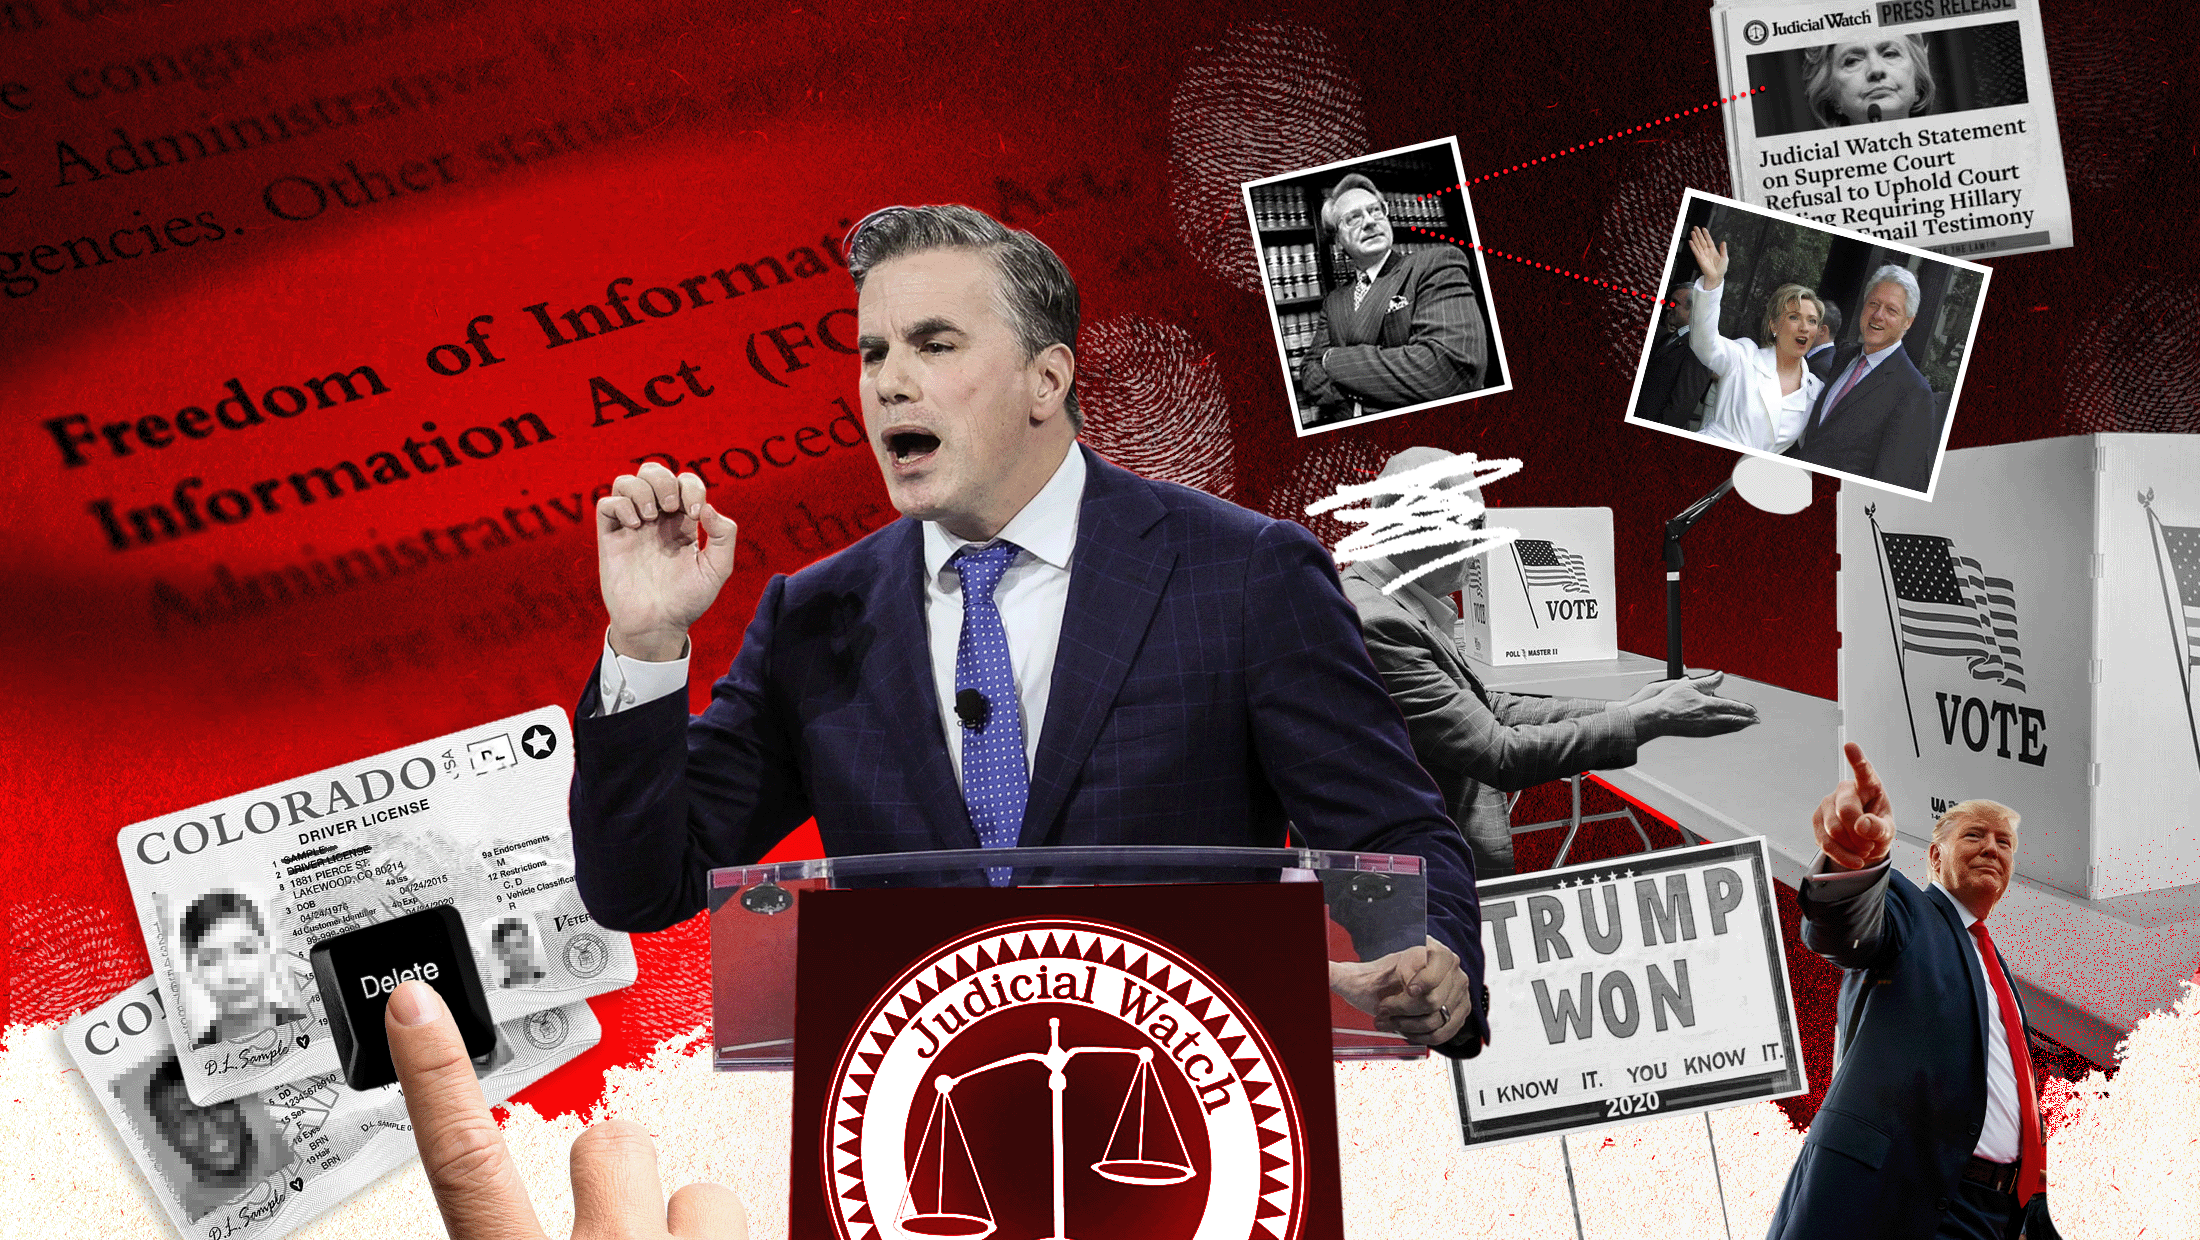 Tom Fitton is standing in front of a podium with one hand up at the center of the graphic. Behind him is a collage of images including a finger pointing to a Colorado driver's license, a Freedom of Information Act request, and photos of Bill and Hillary Clinton, Larry Klayman, Donald Trump and a voting machine.